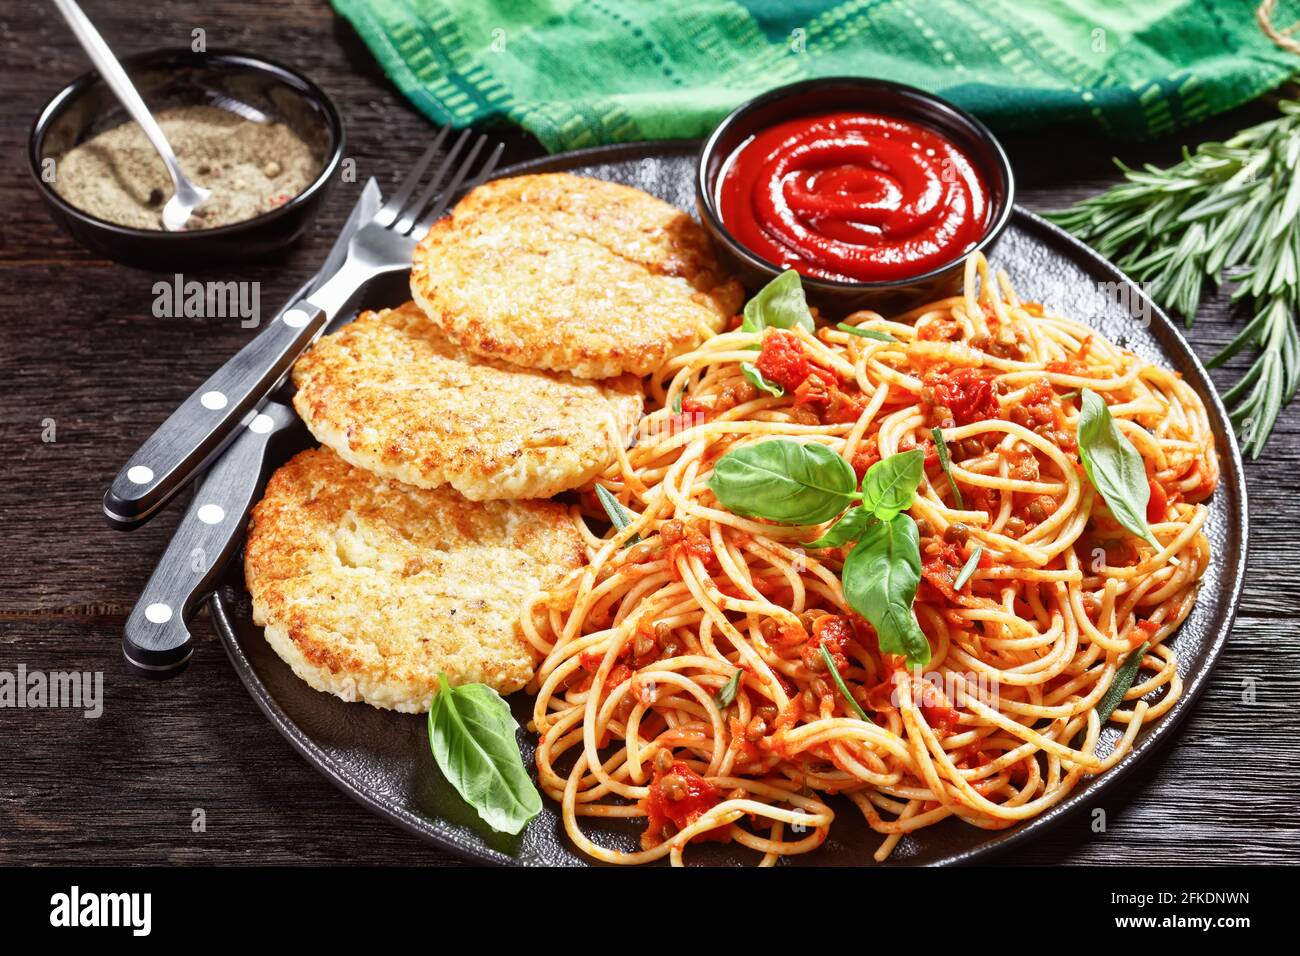 cod fish patties served on a black plate with spaghetti mixed with lentils, tomato sauce and herbs, horizontal view from above Stock Photo